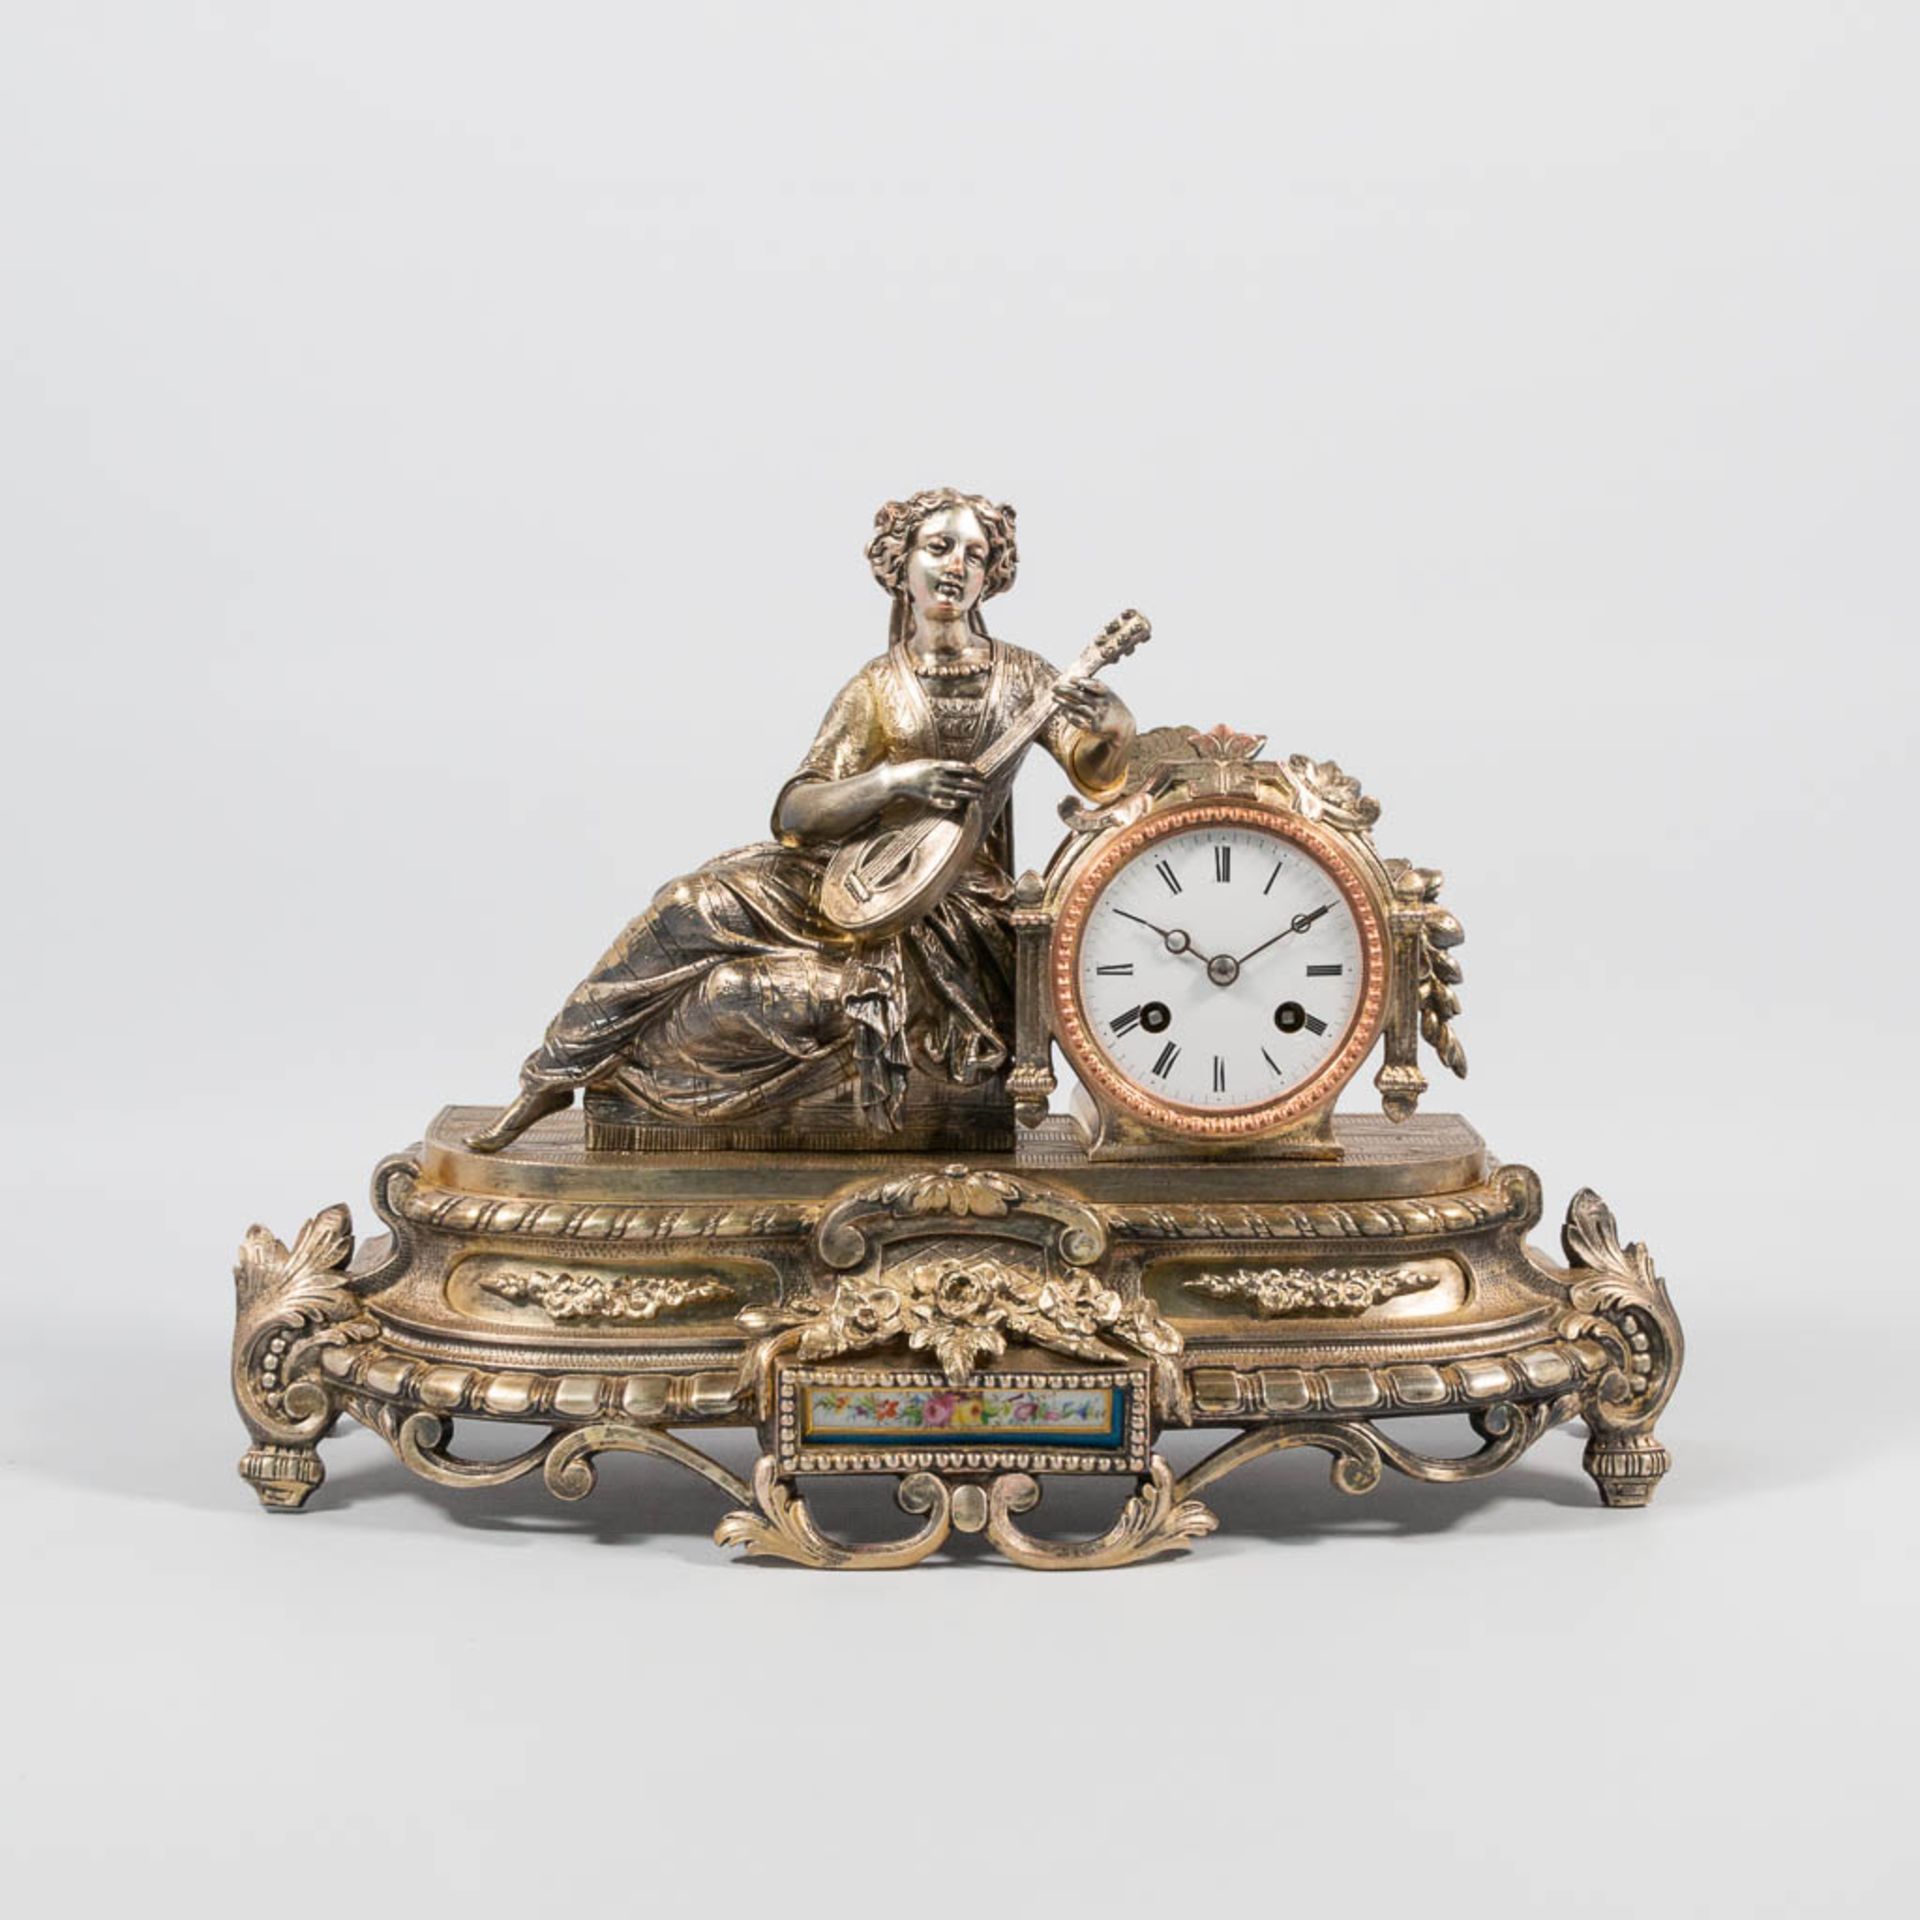 A Mantle clock with Romantic Scene, Silver plated Bronze.